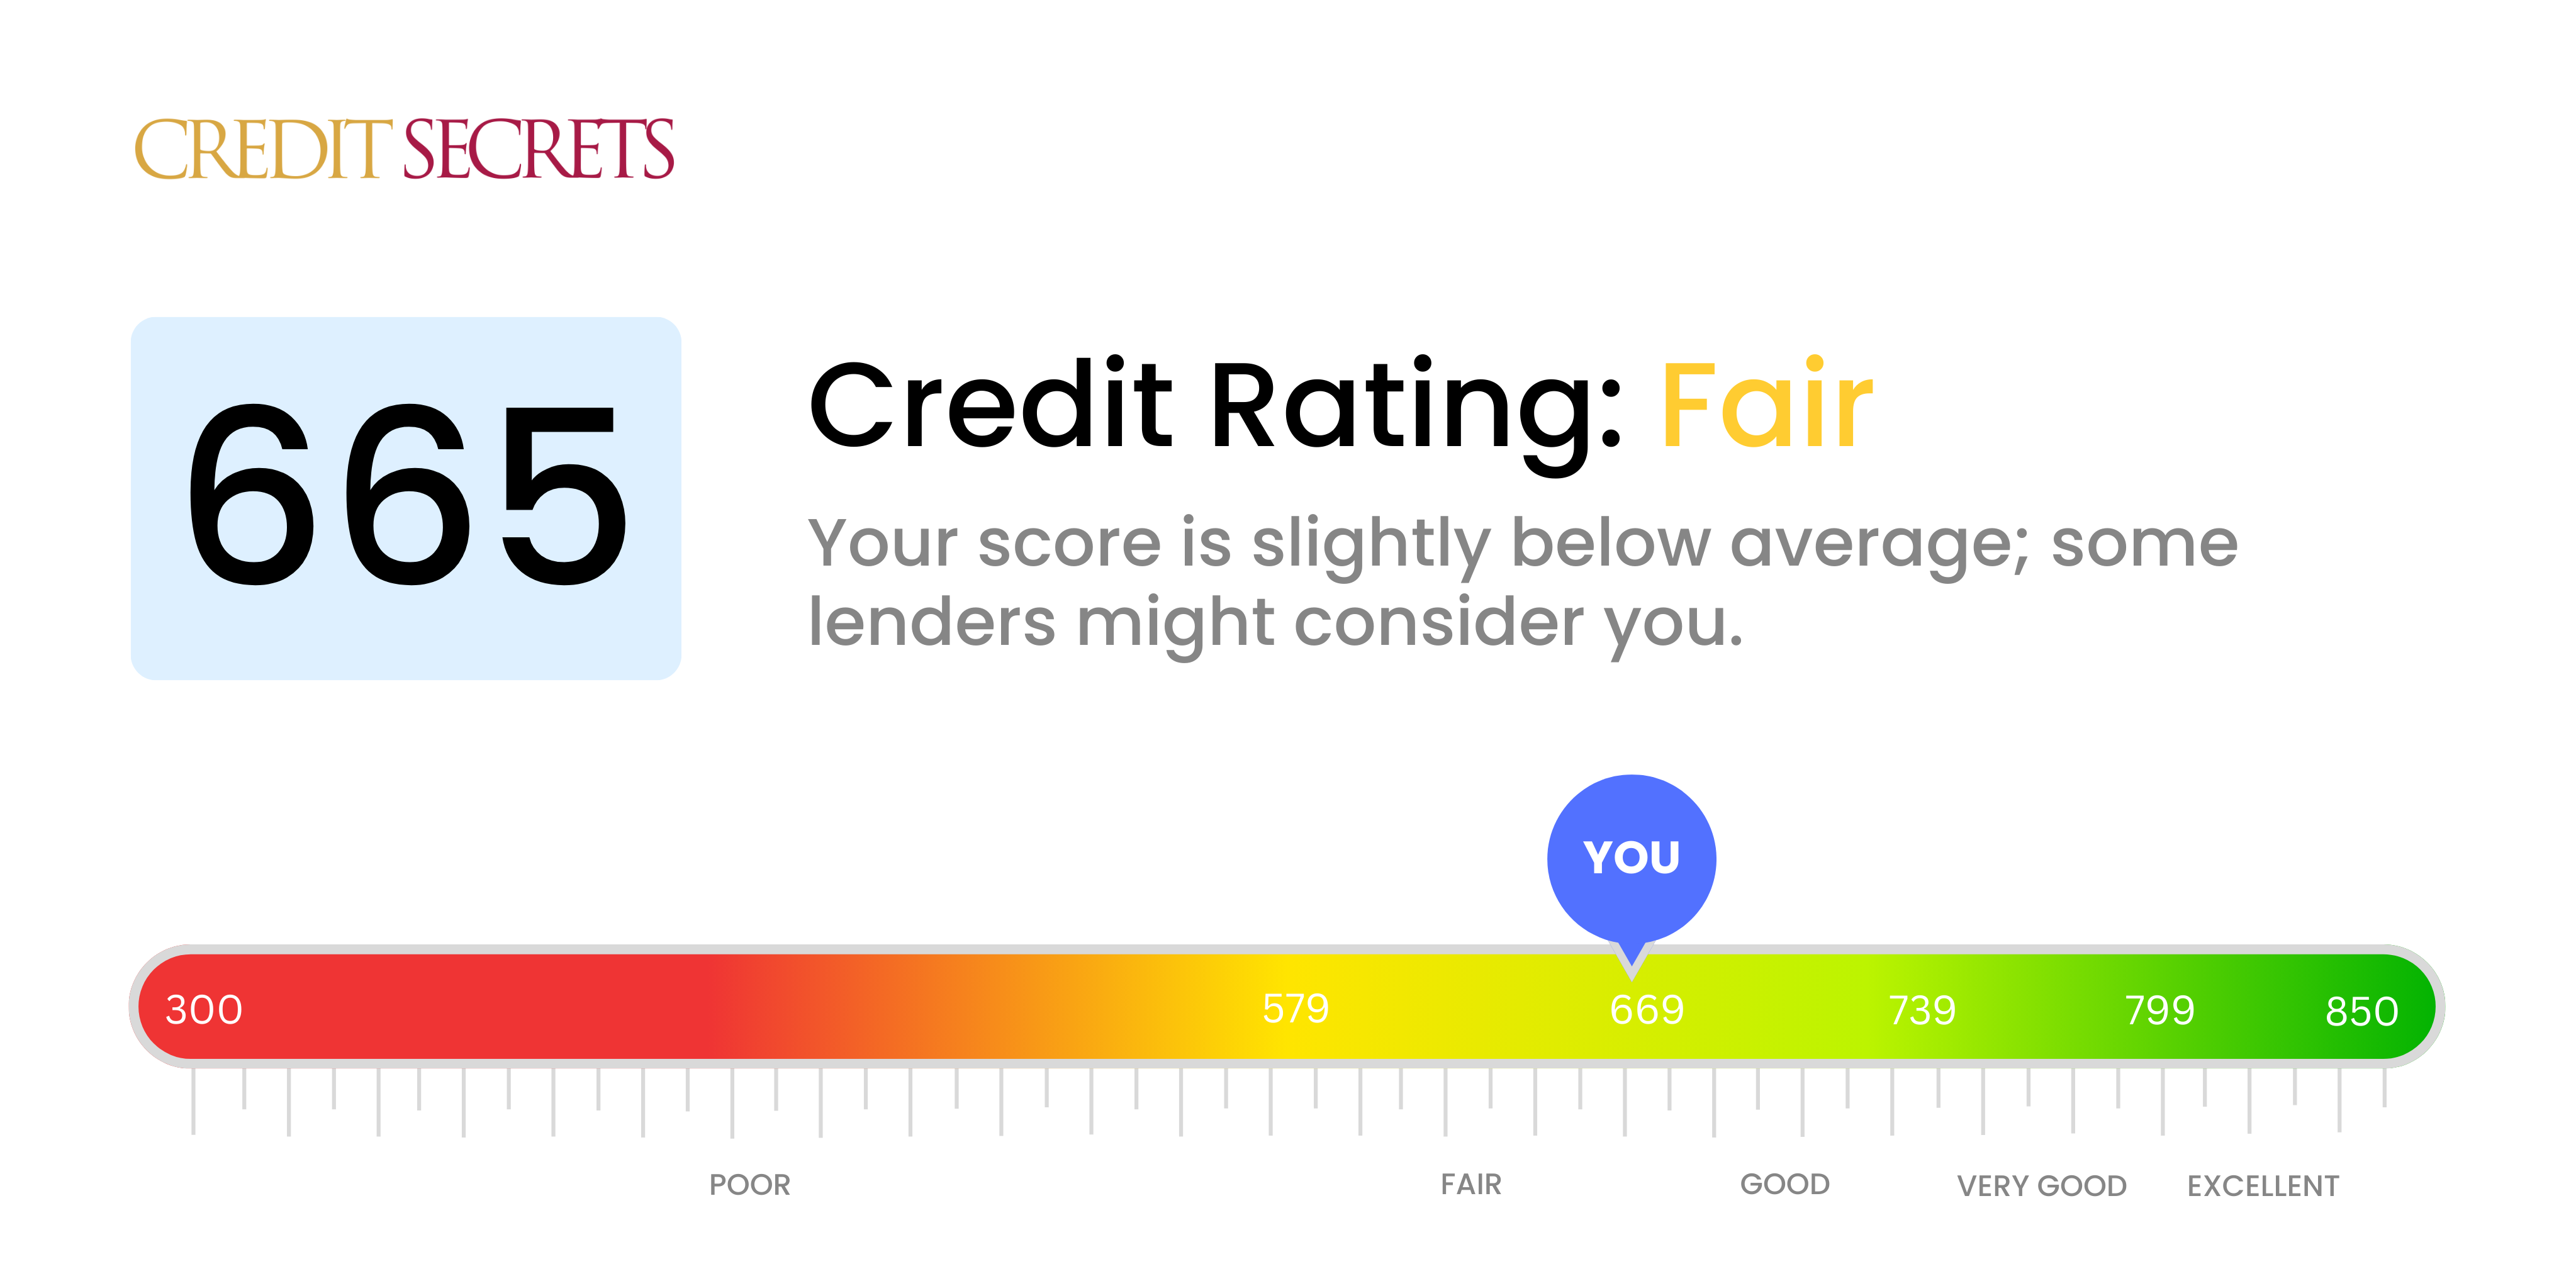 Is 665 a good credit score?